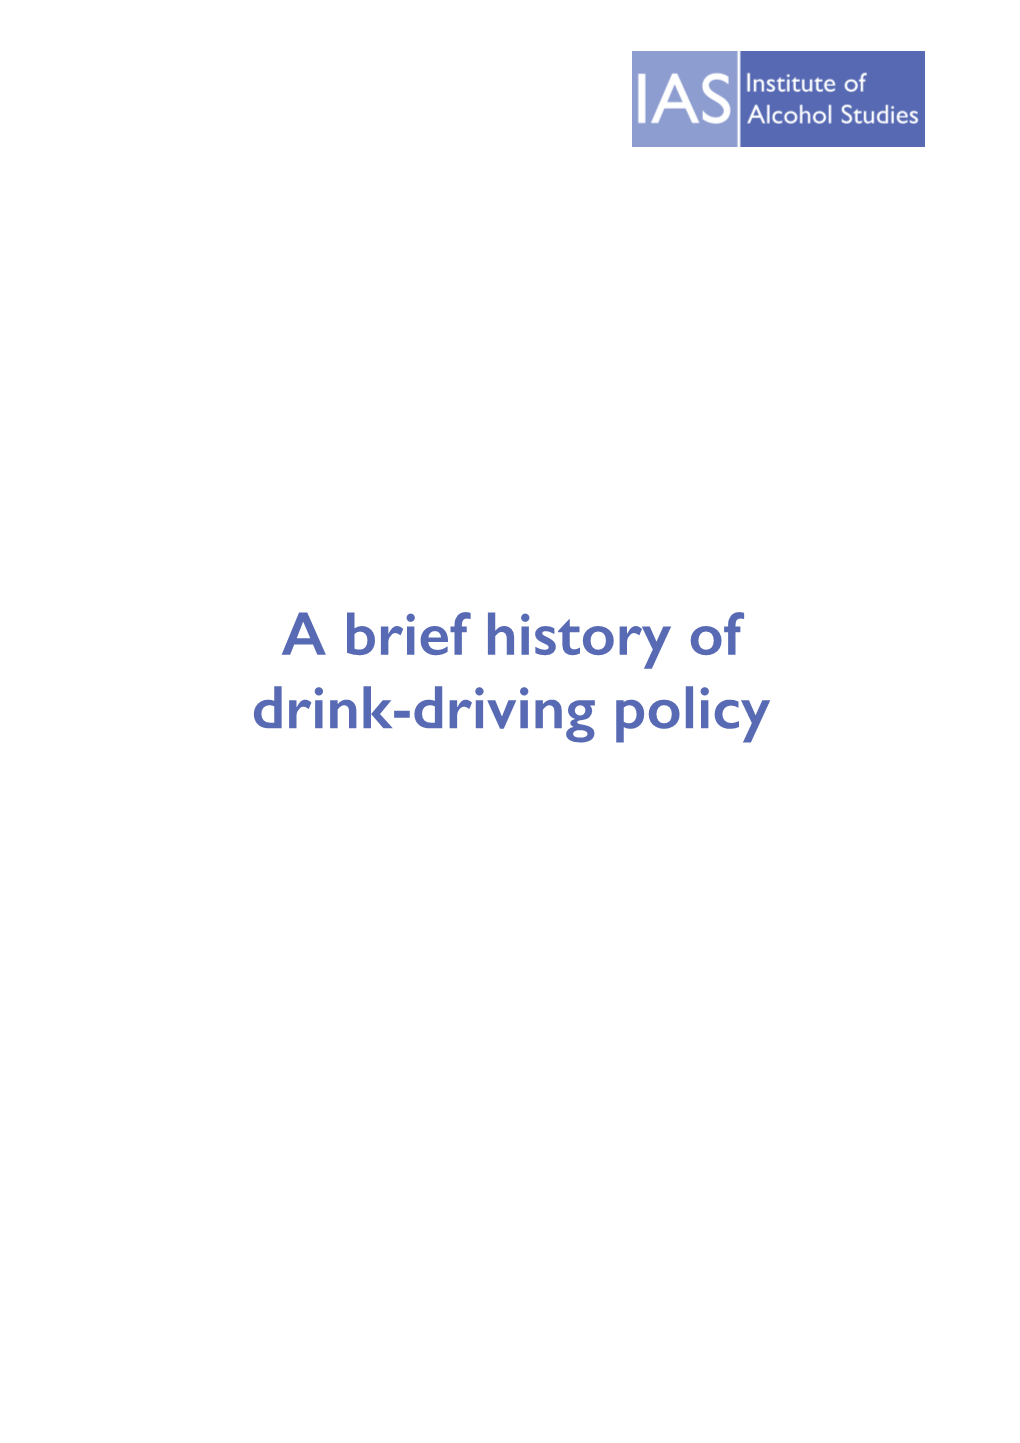 A Brief History of Drink-Driving Policy